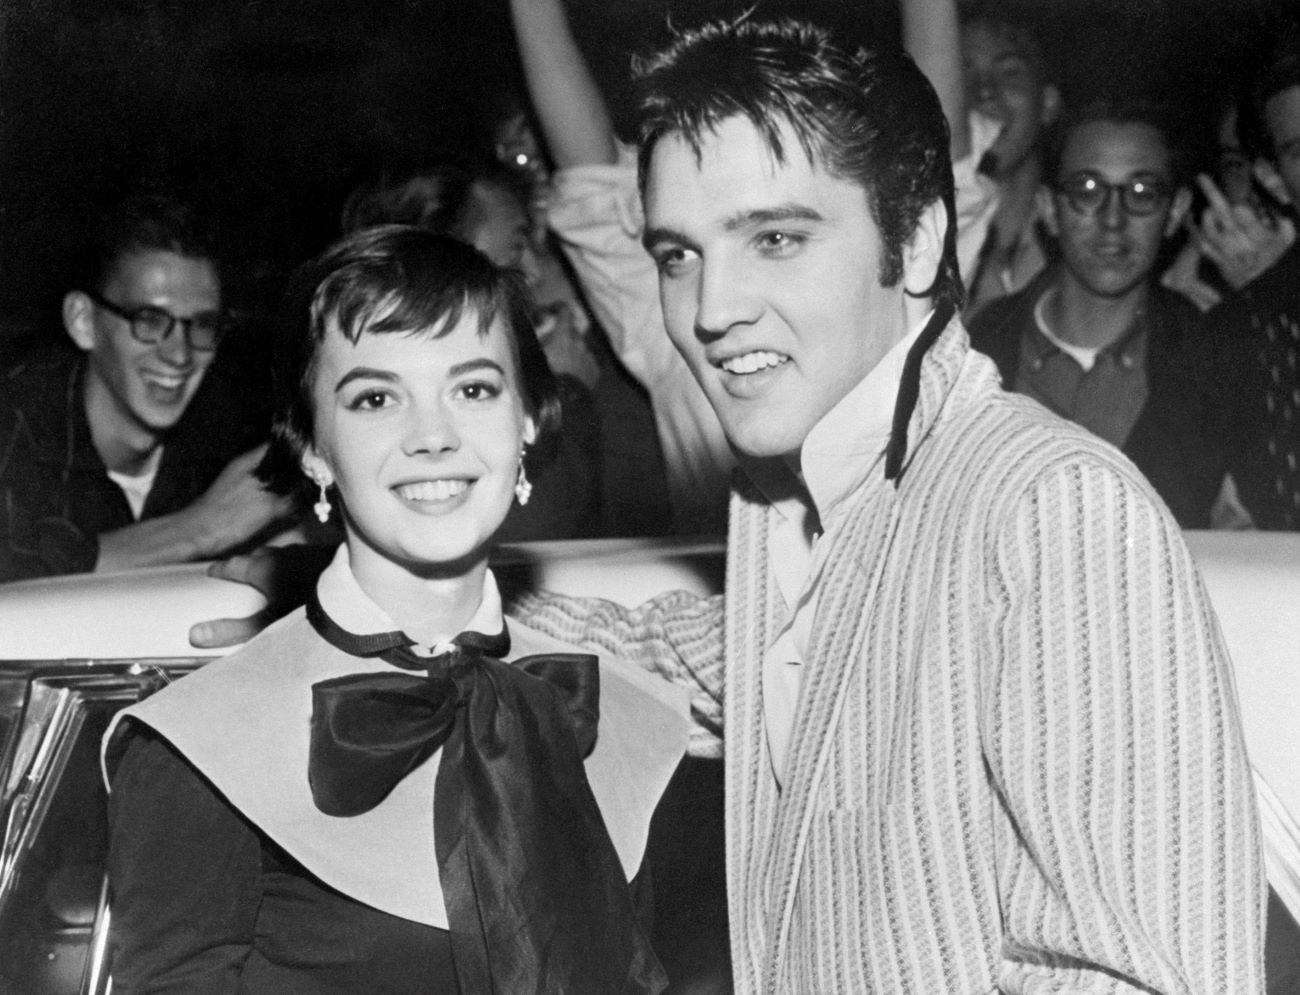 A black and white picture of Natalie Wood and Elvis Presley smiling at the camera while standing in front of a crowd.